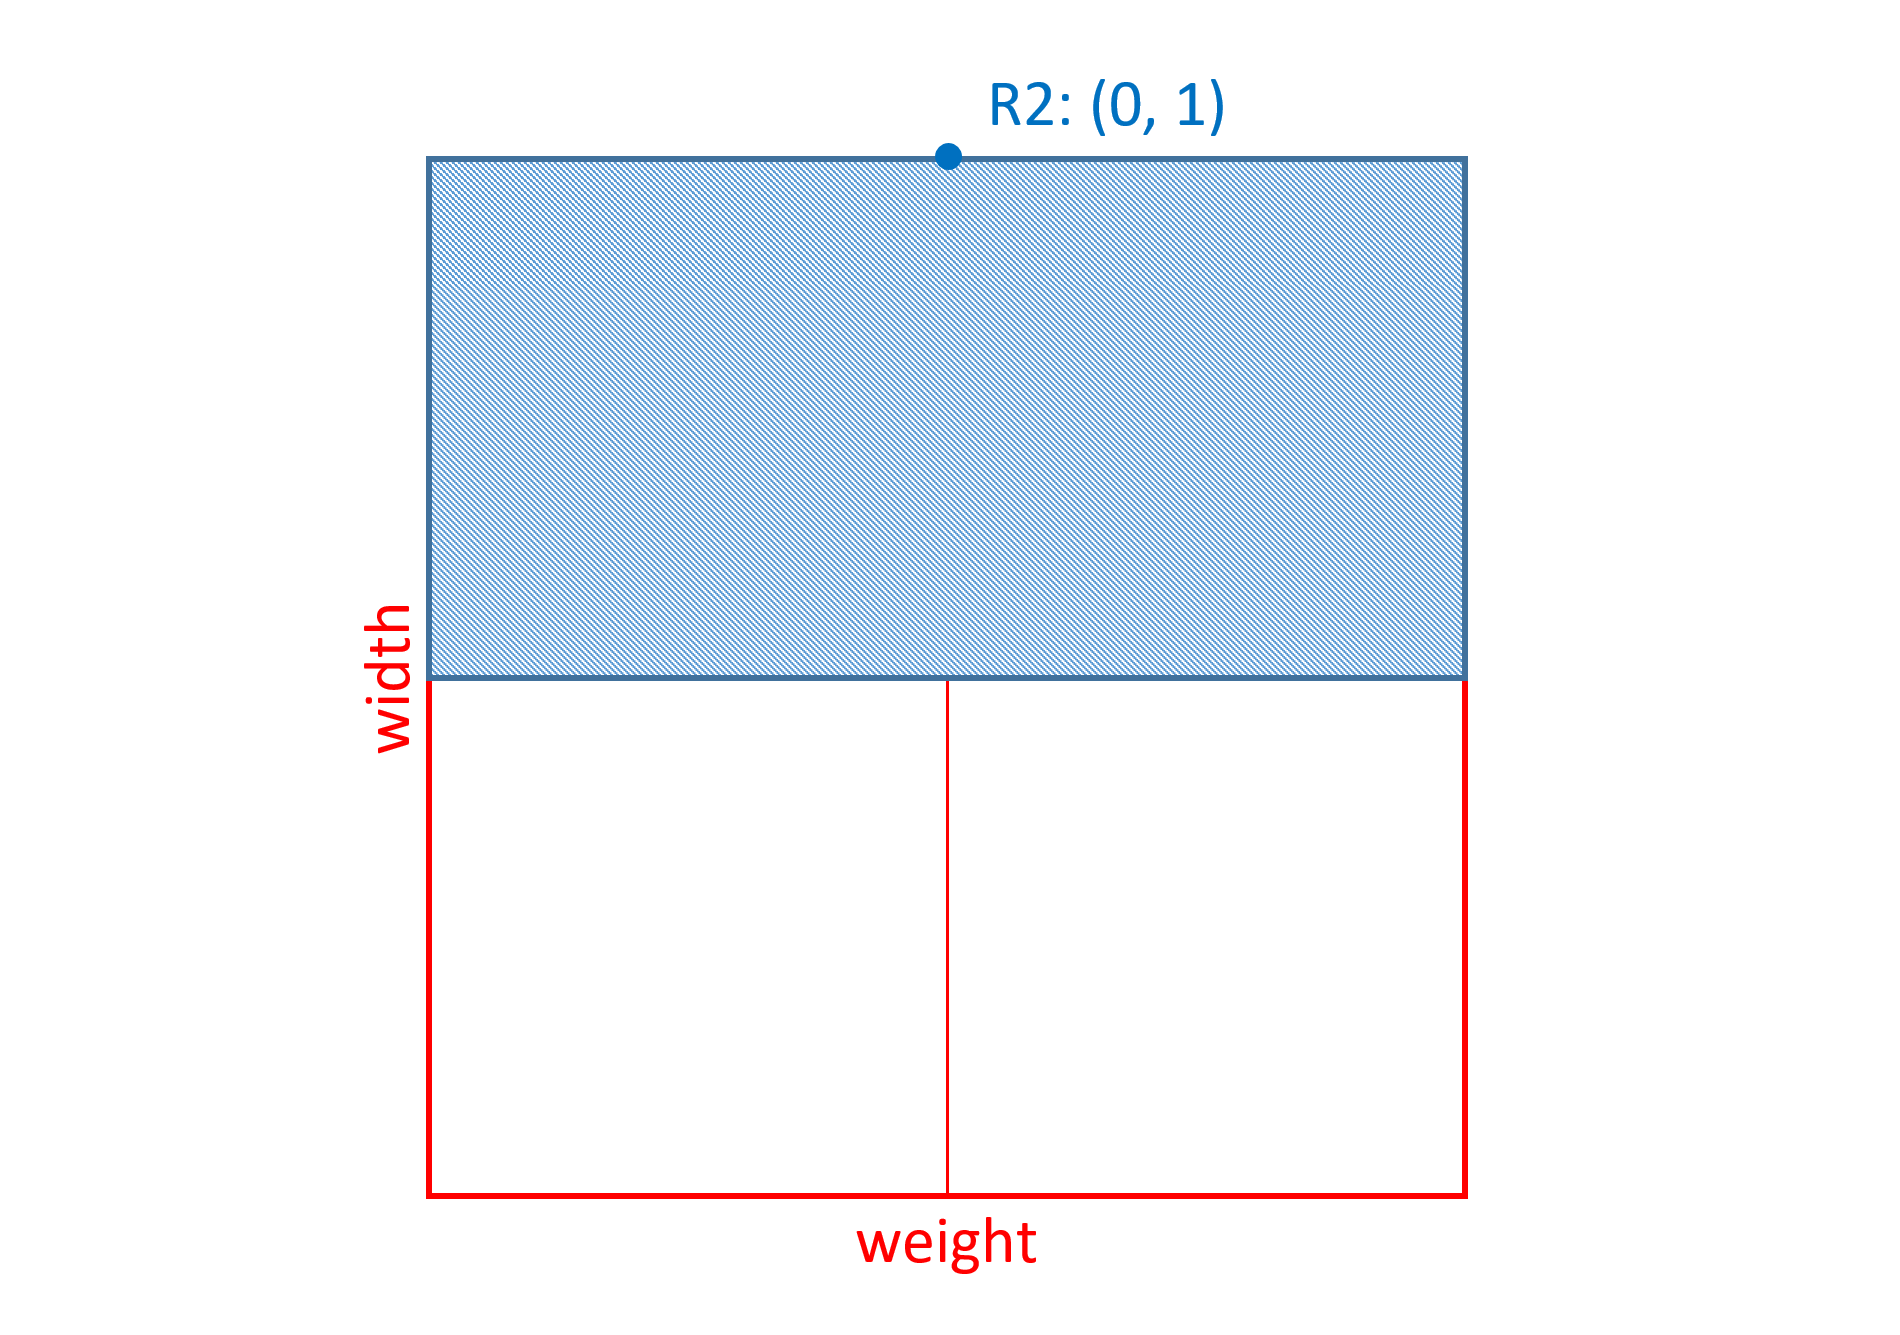 A Cartesian space with a region covering the top two quadrants